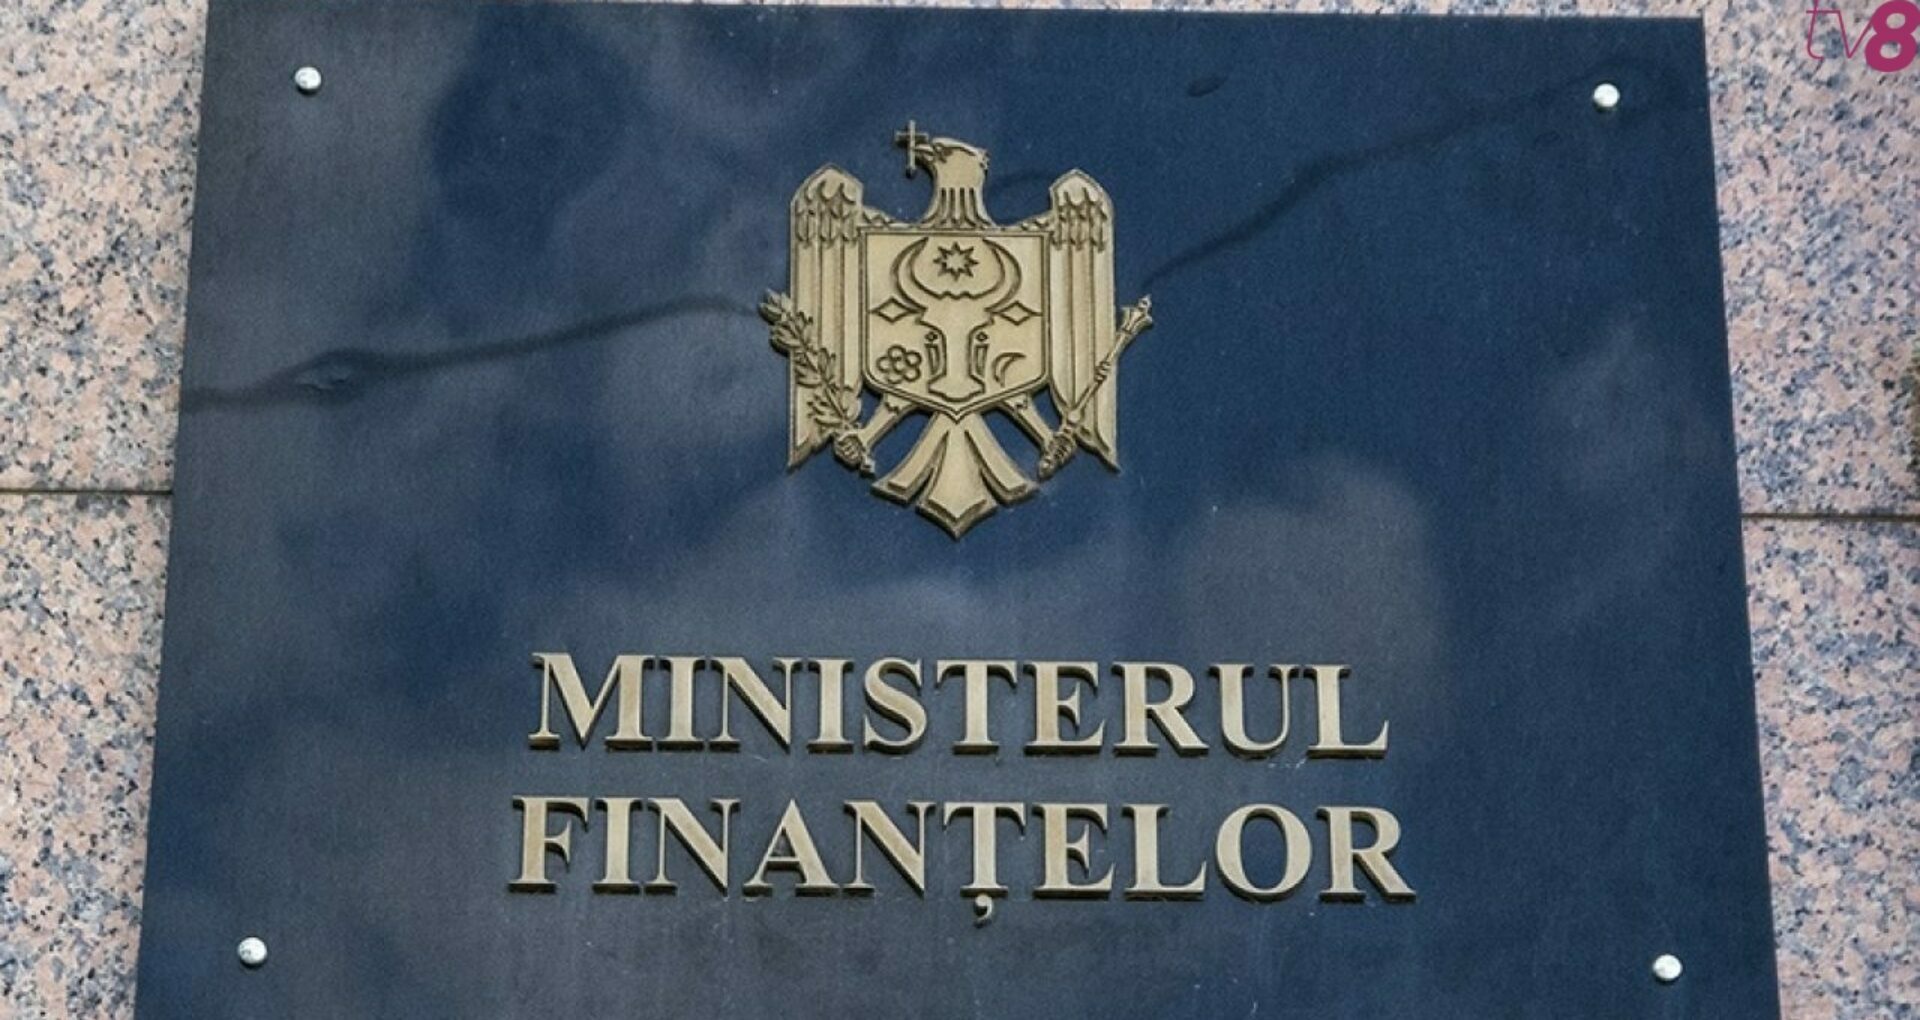 The Ministry of Finance Announced What Happened with the Money Received Following a Crowdfunding Campaign